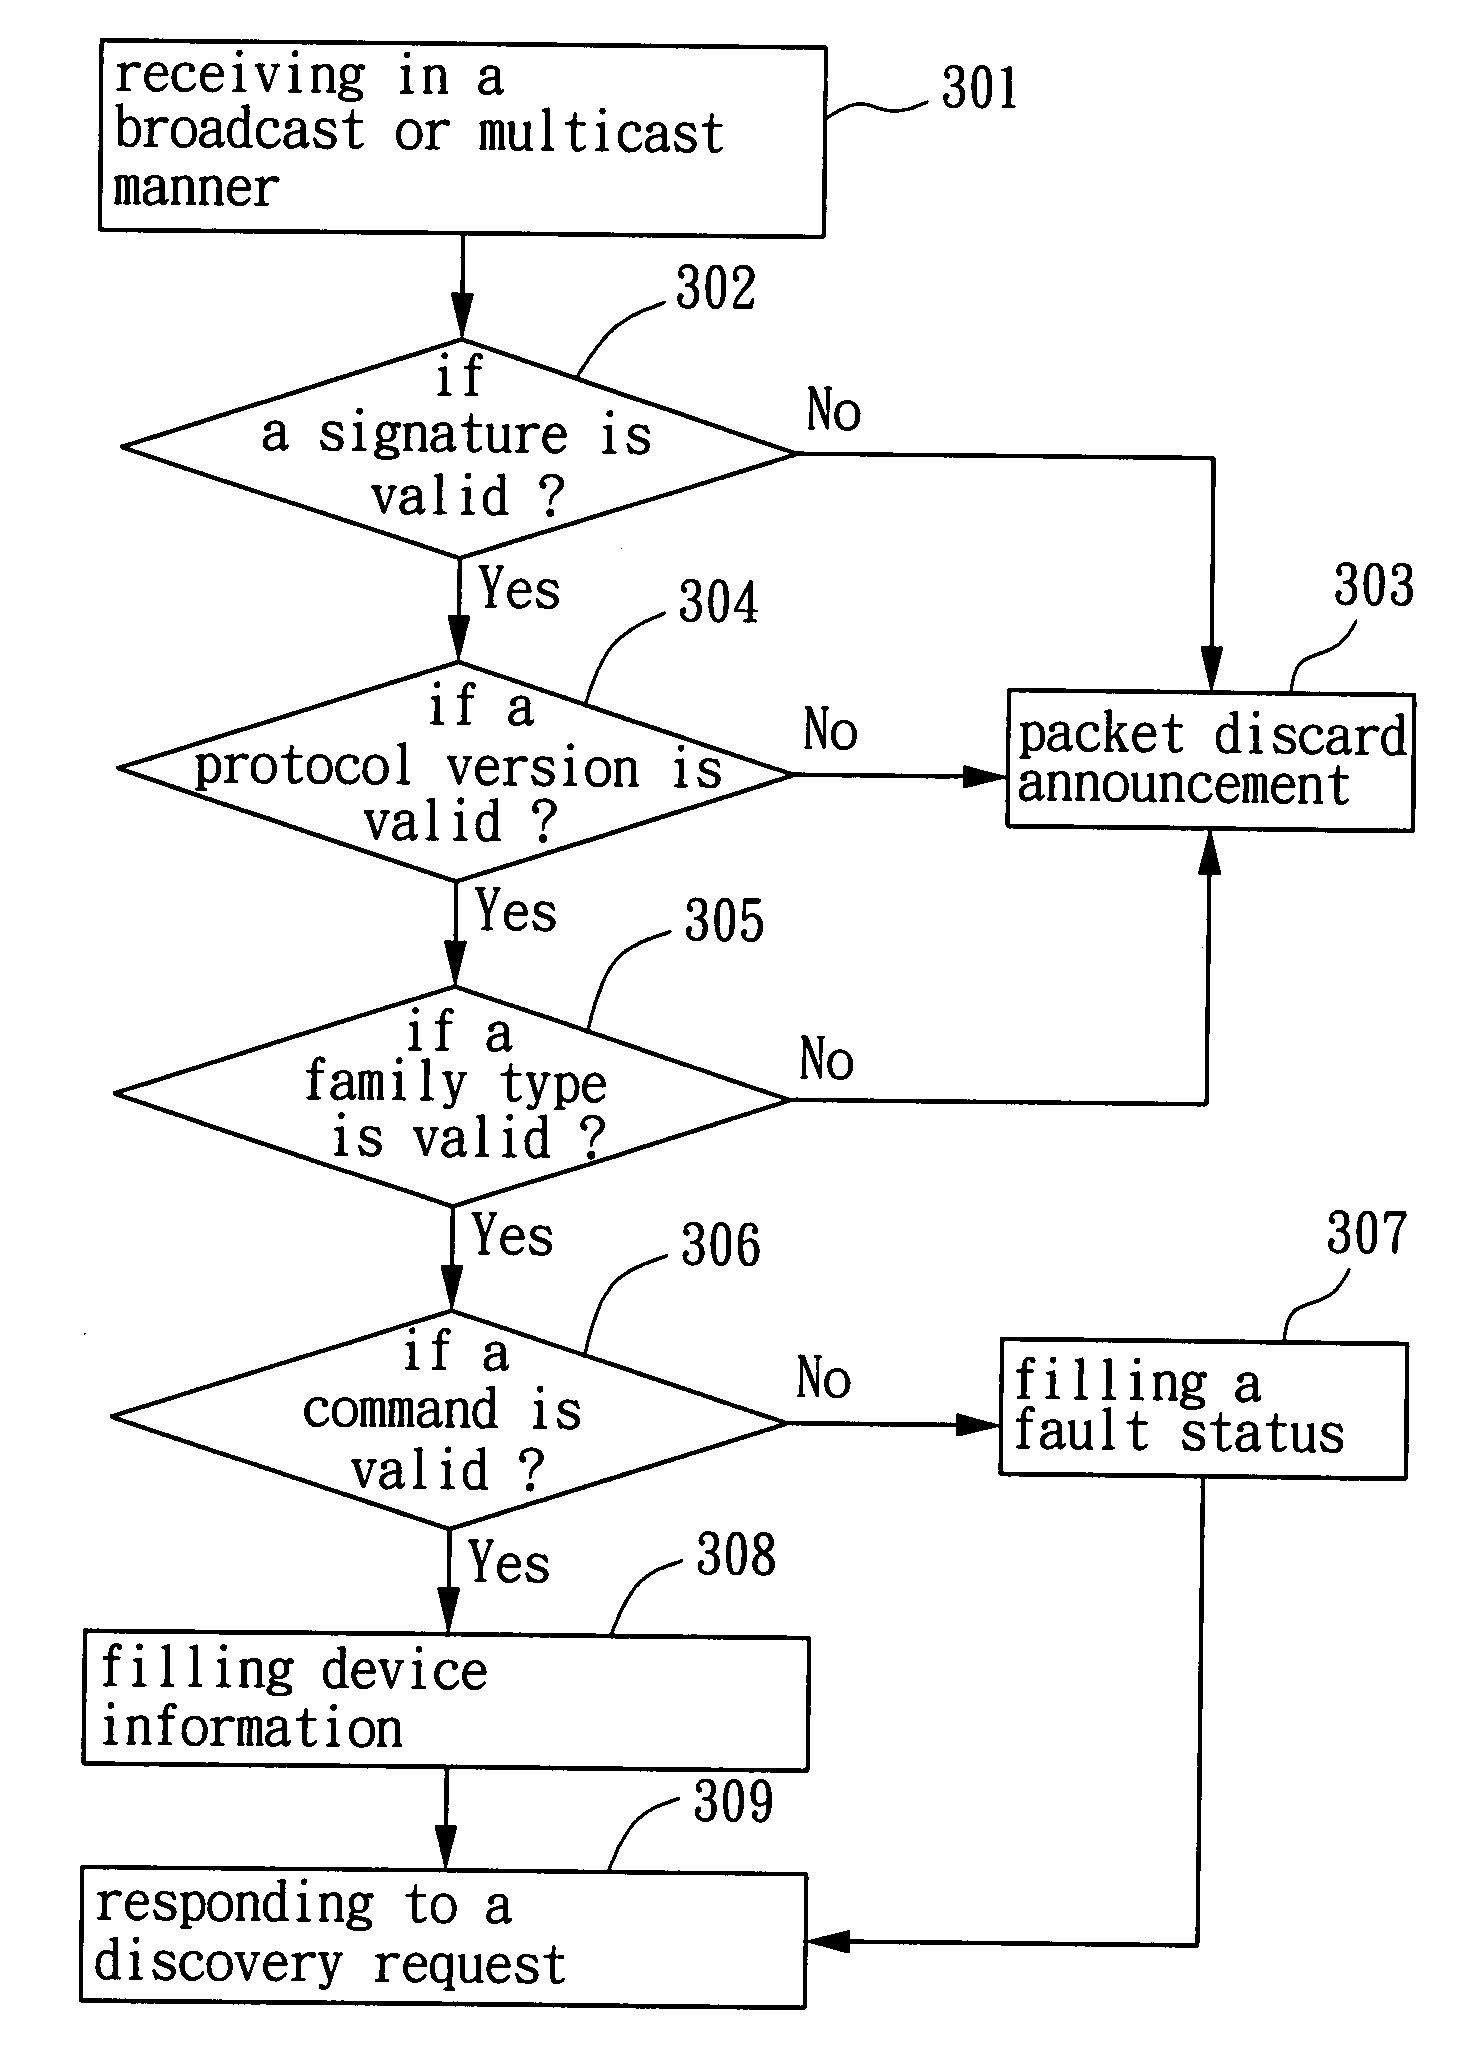 Method for discovering network device